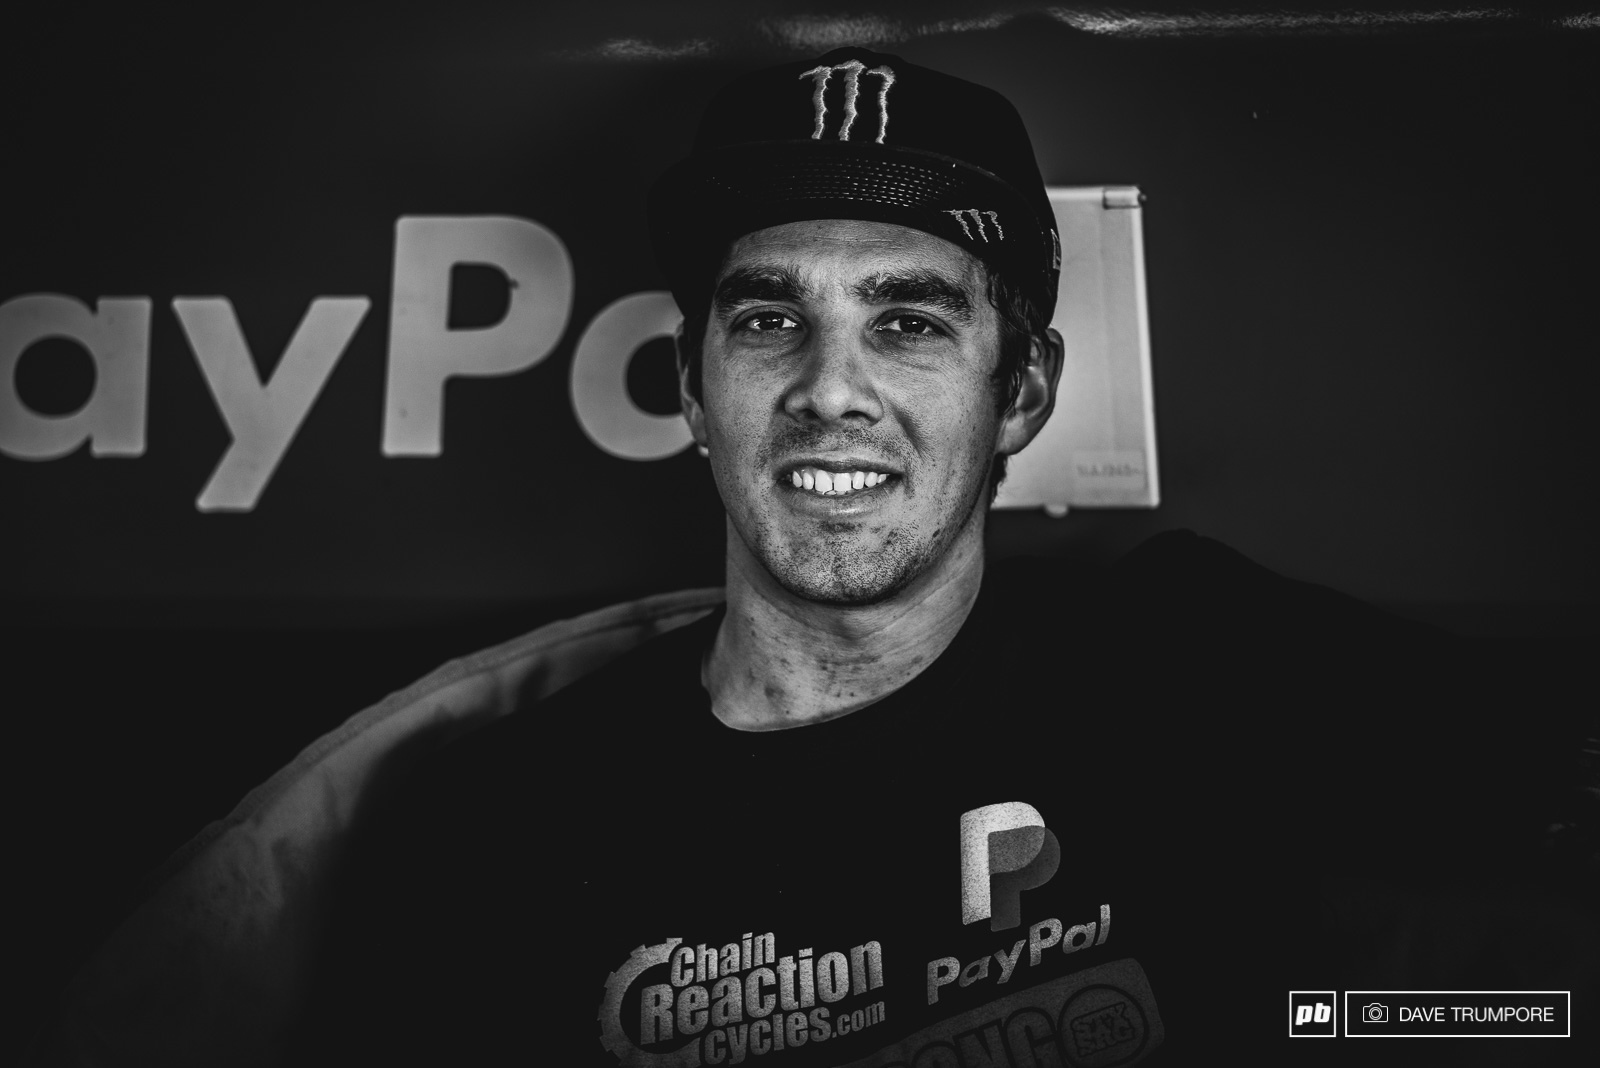 It s good to see Sam Hill smiling and excited about riding bikes again.